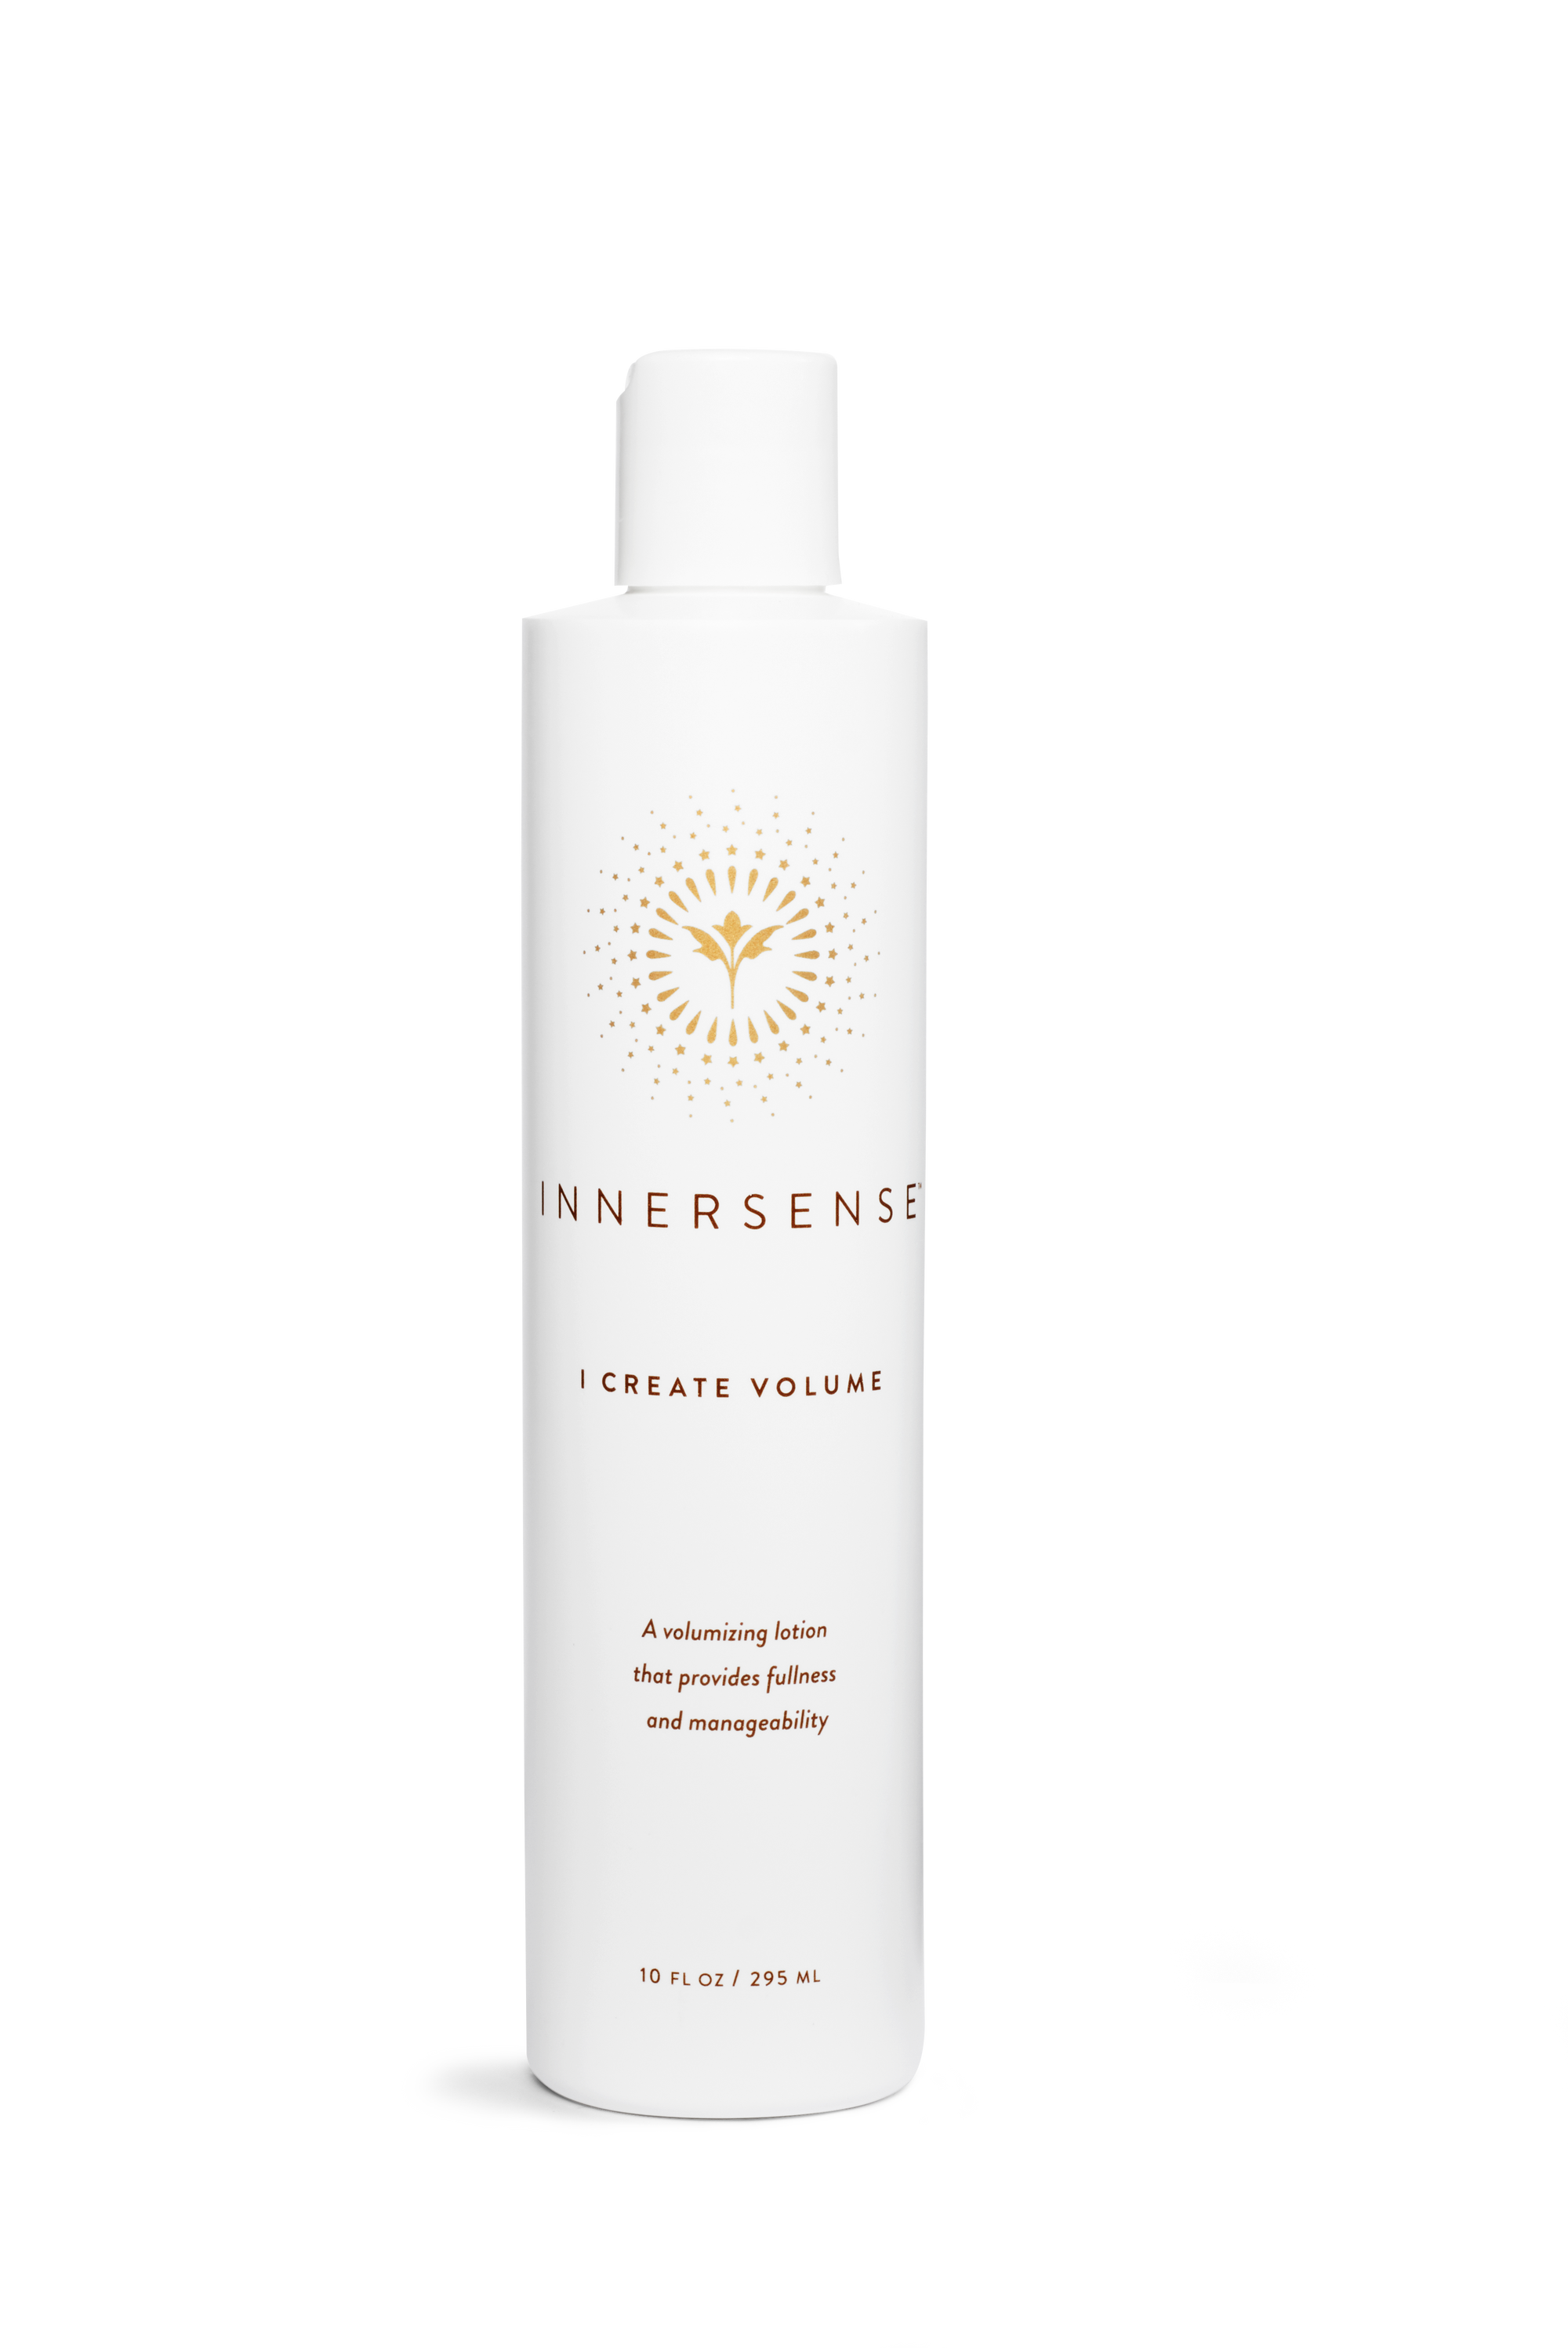 Innersense presents new refill pouches for hairbaths and conditioners